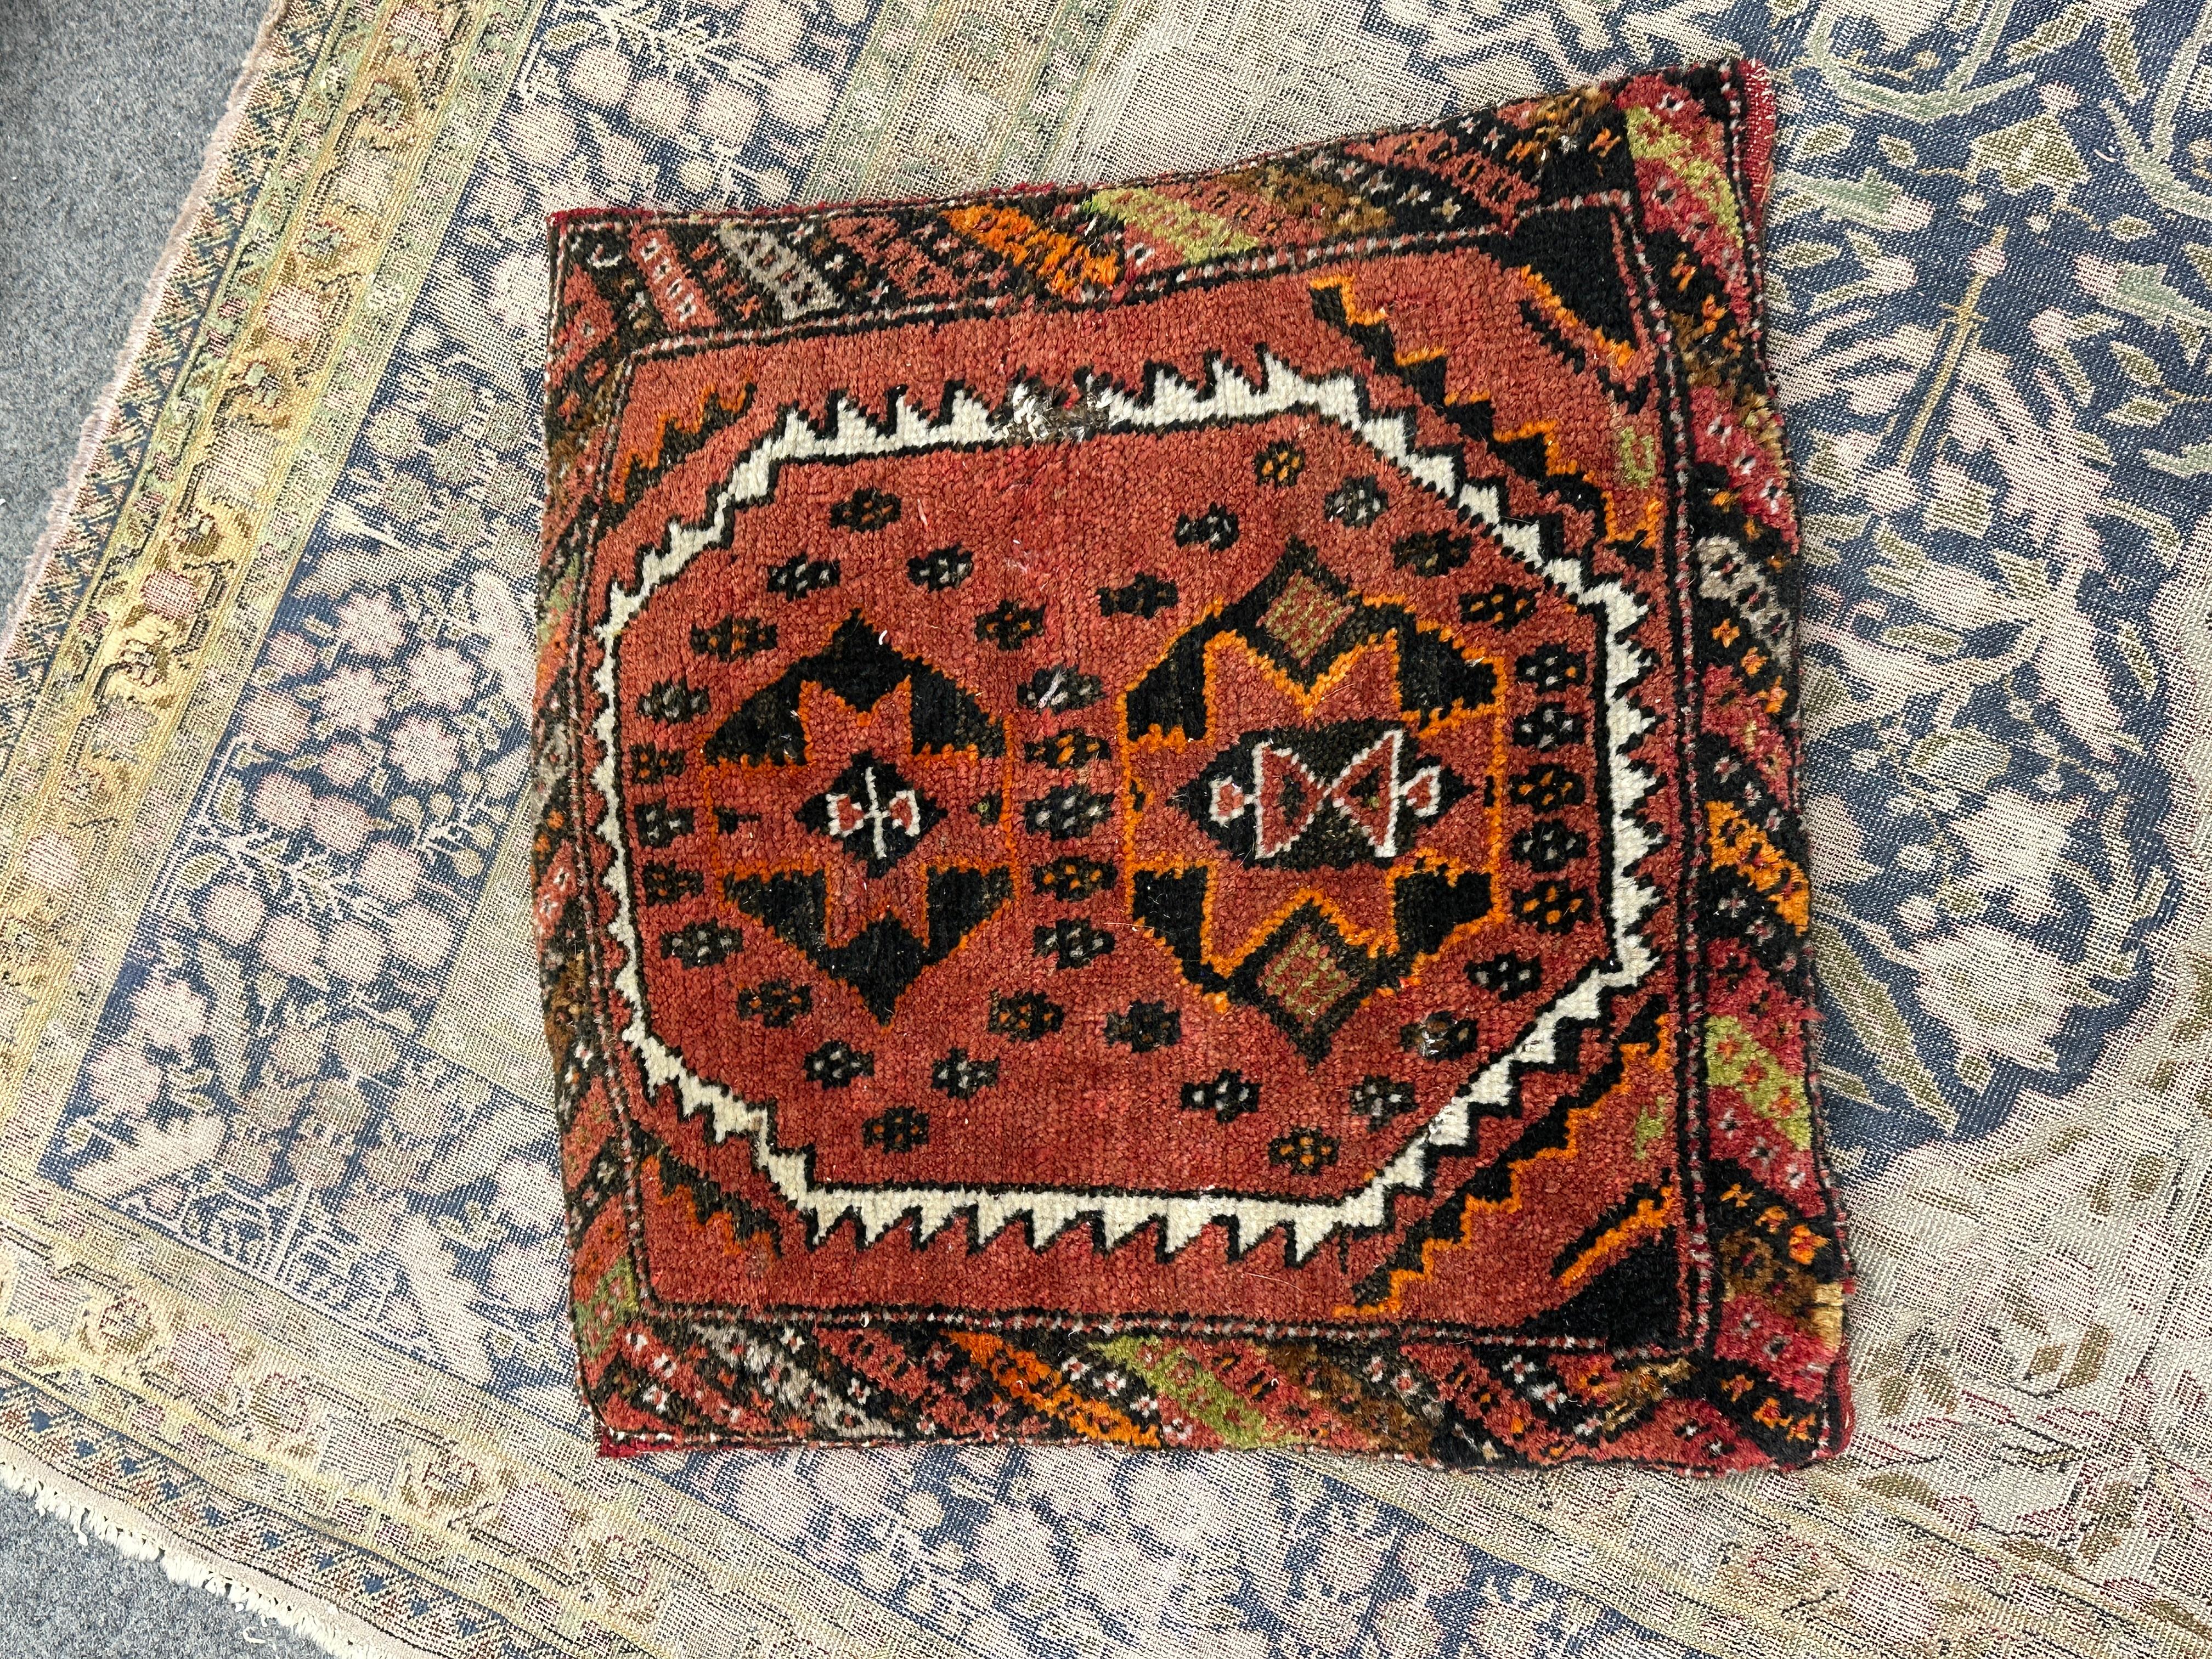 Gorgeous oriental pillow, cushion or seat pillow. Original vintage cushions made from Oriental rugs. Estimated to date from the 1950s/60s, the cushions themselves are vintage made (not recently made from vintage rugs) as can be seen by the